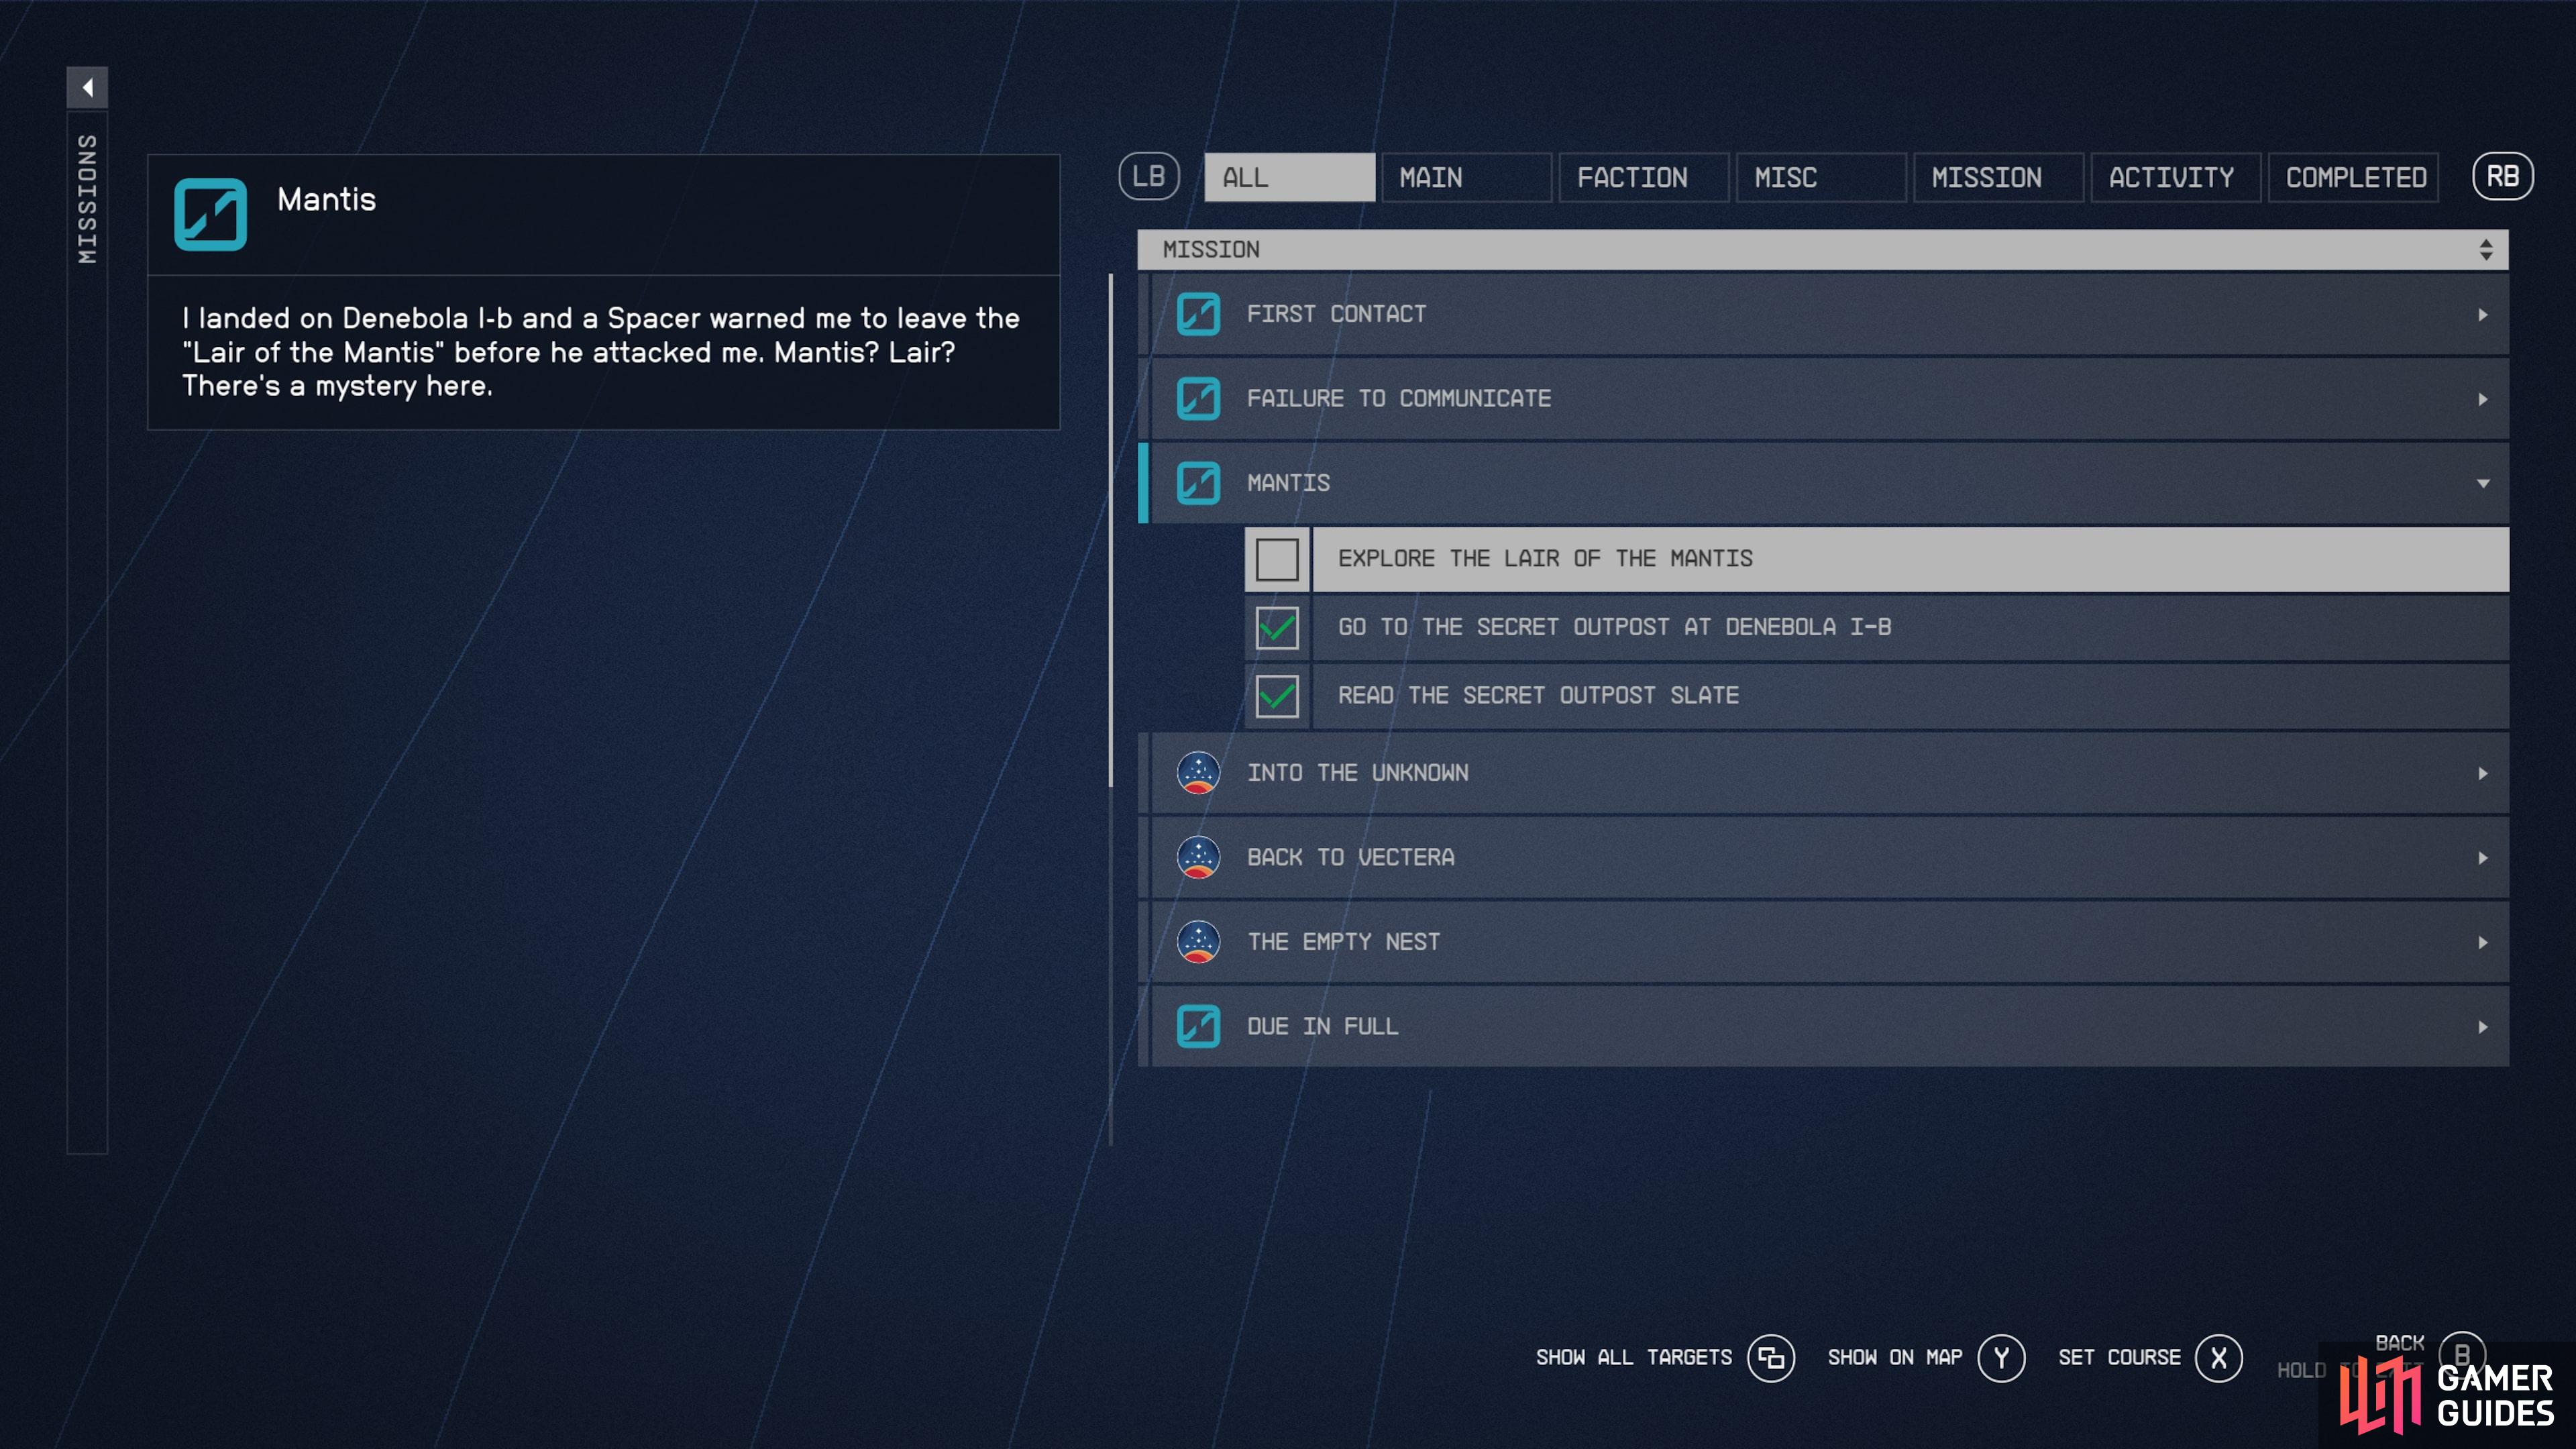 If you need more info you can check your mission log at any time.